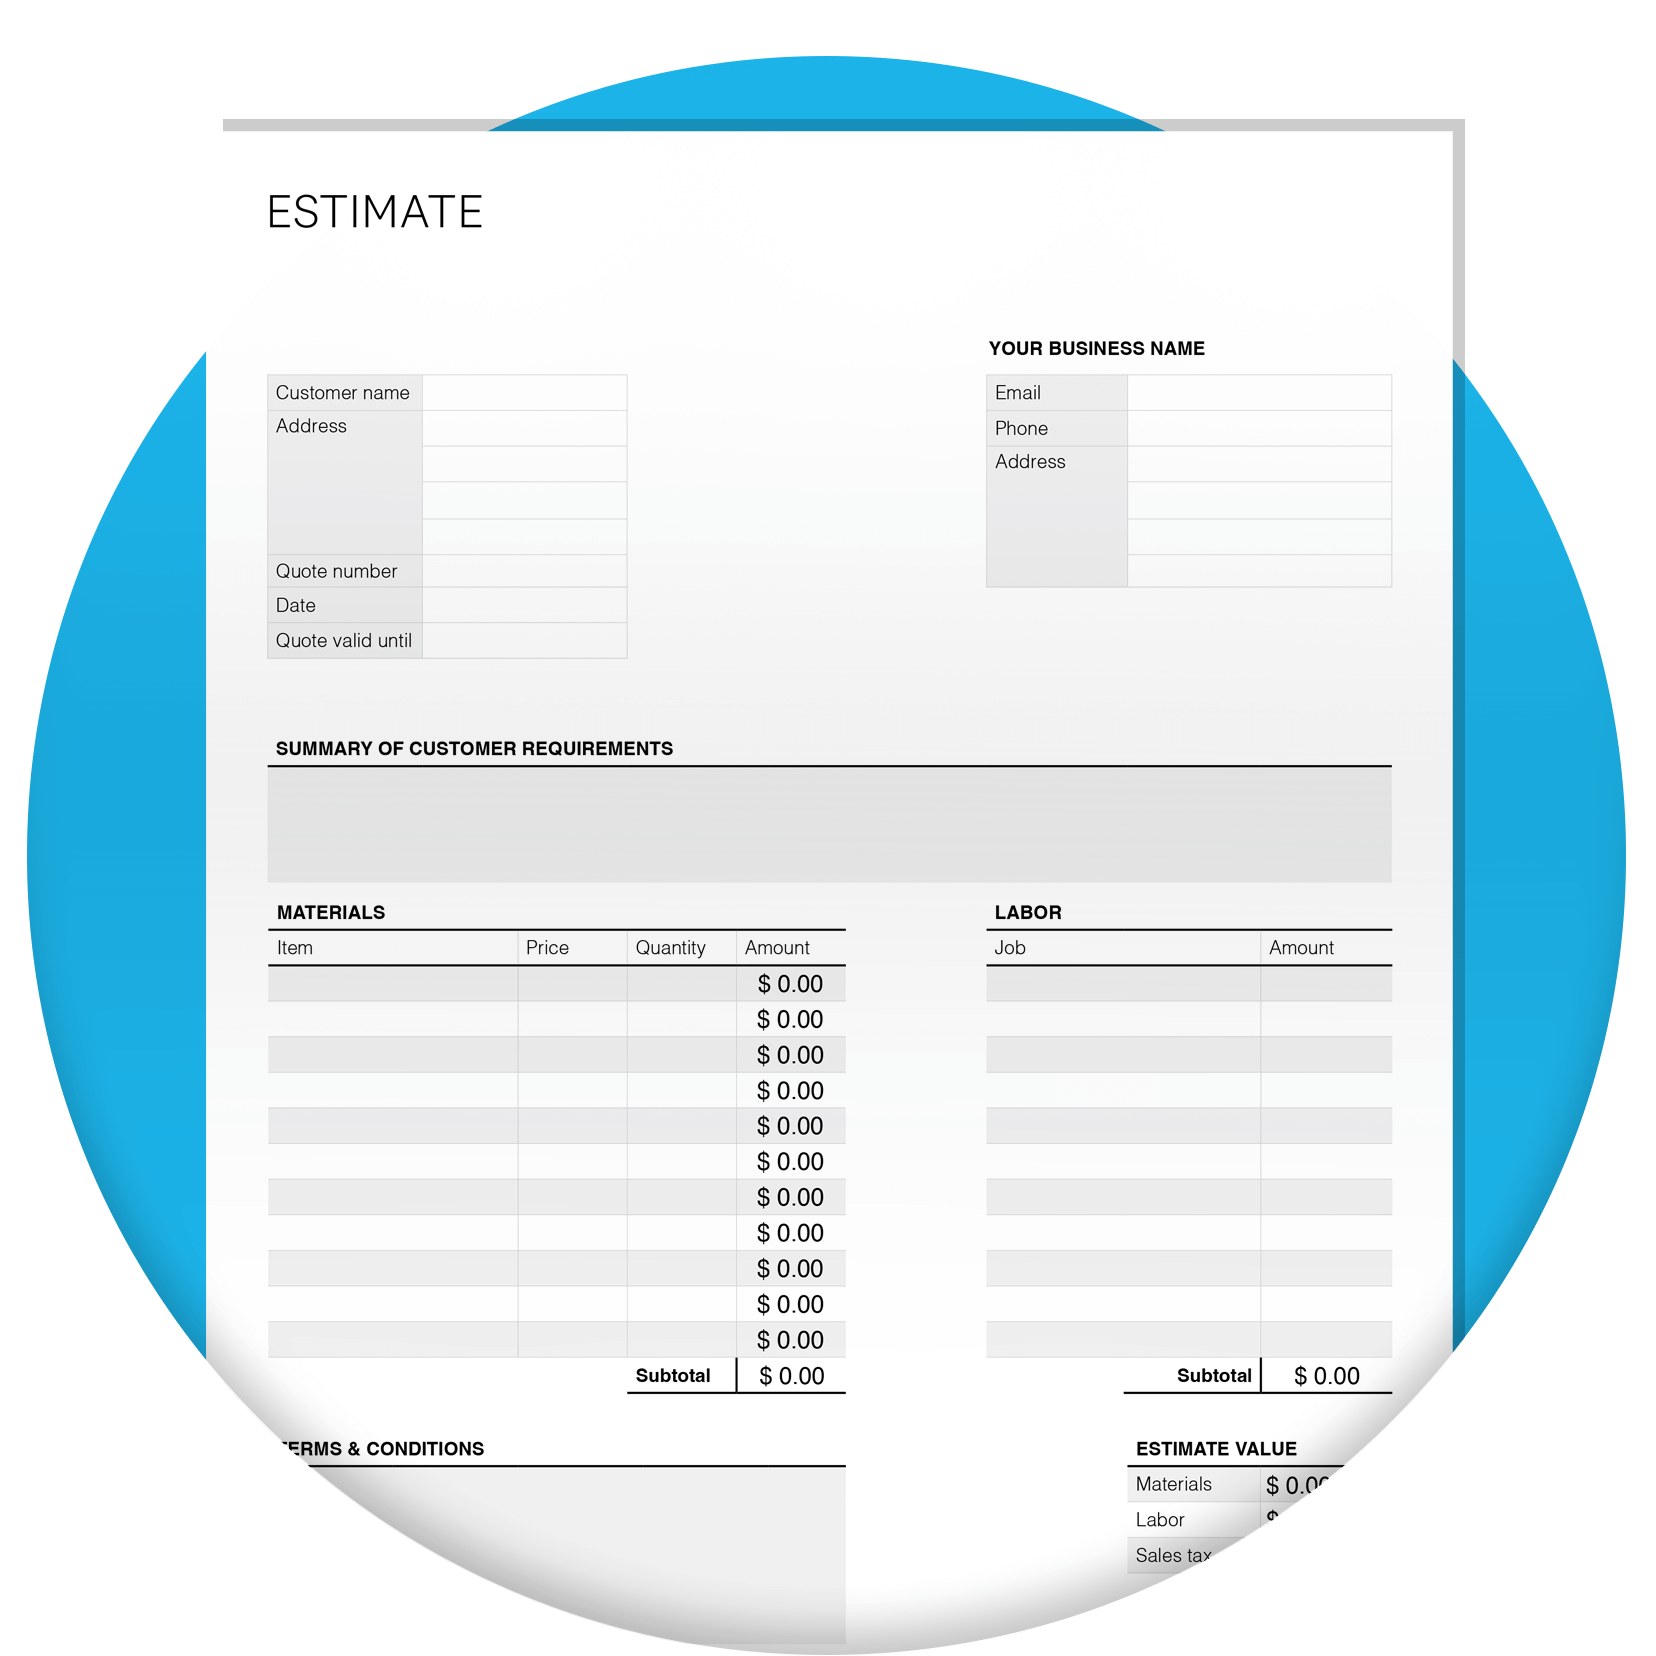 Construction estimate template with blank fields for users to fill out.